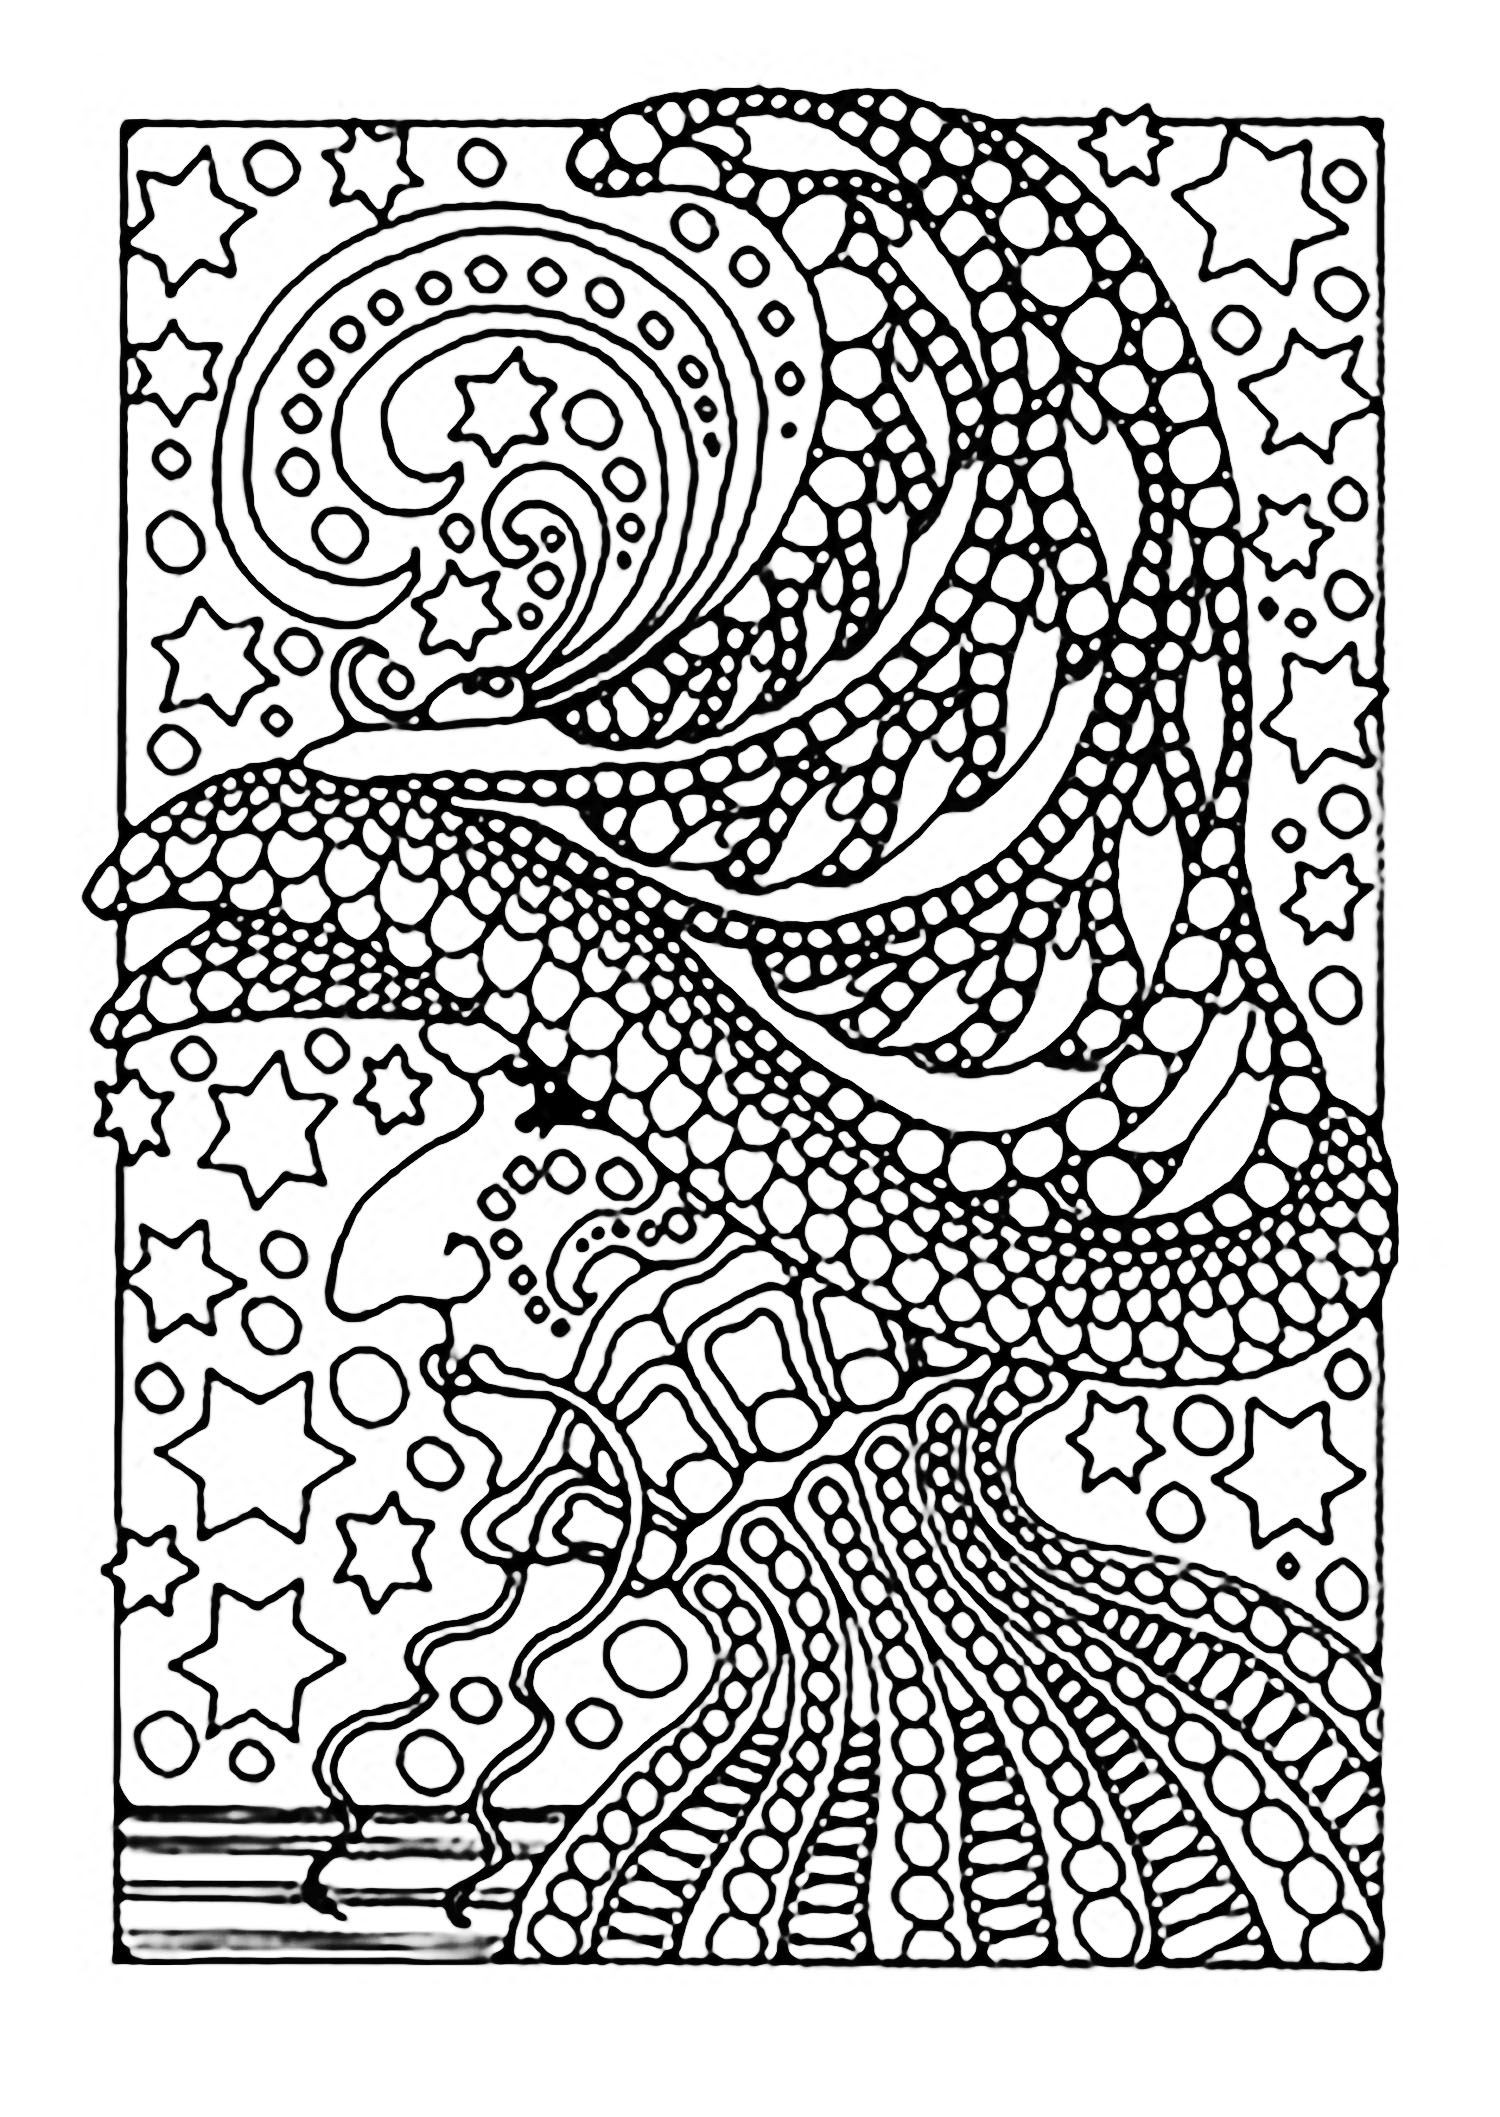 Free Zentangle Coloring Pages for Adults | Printable ...